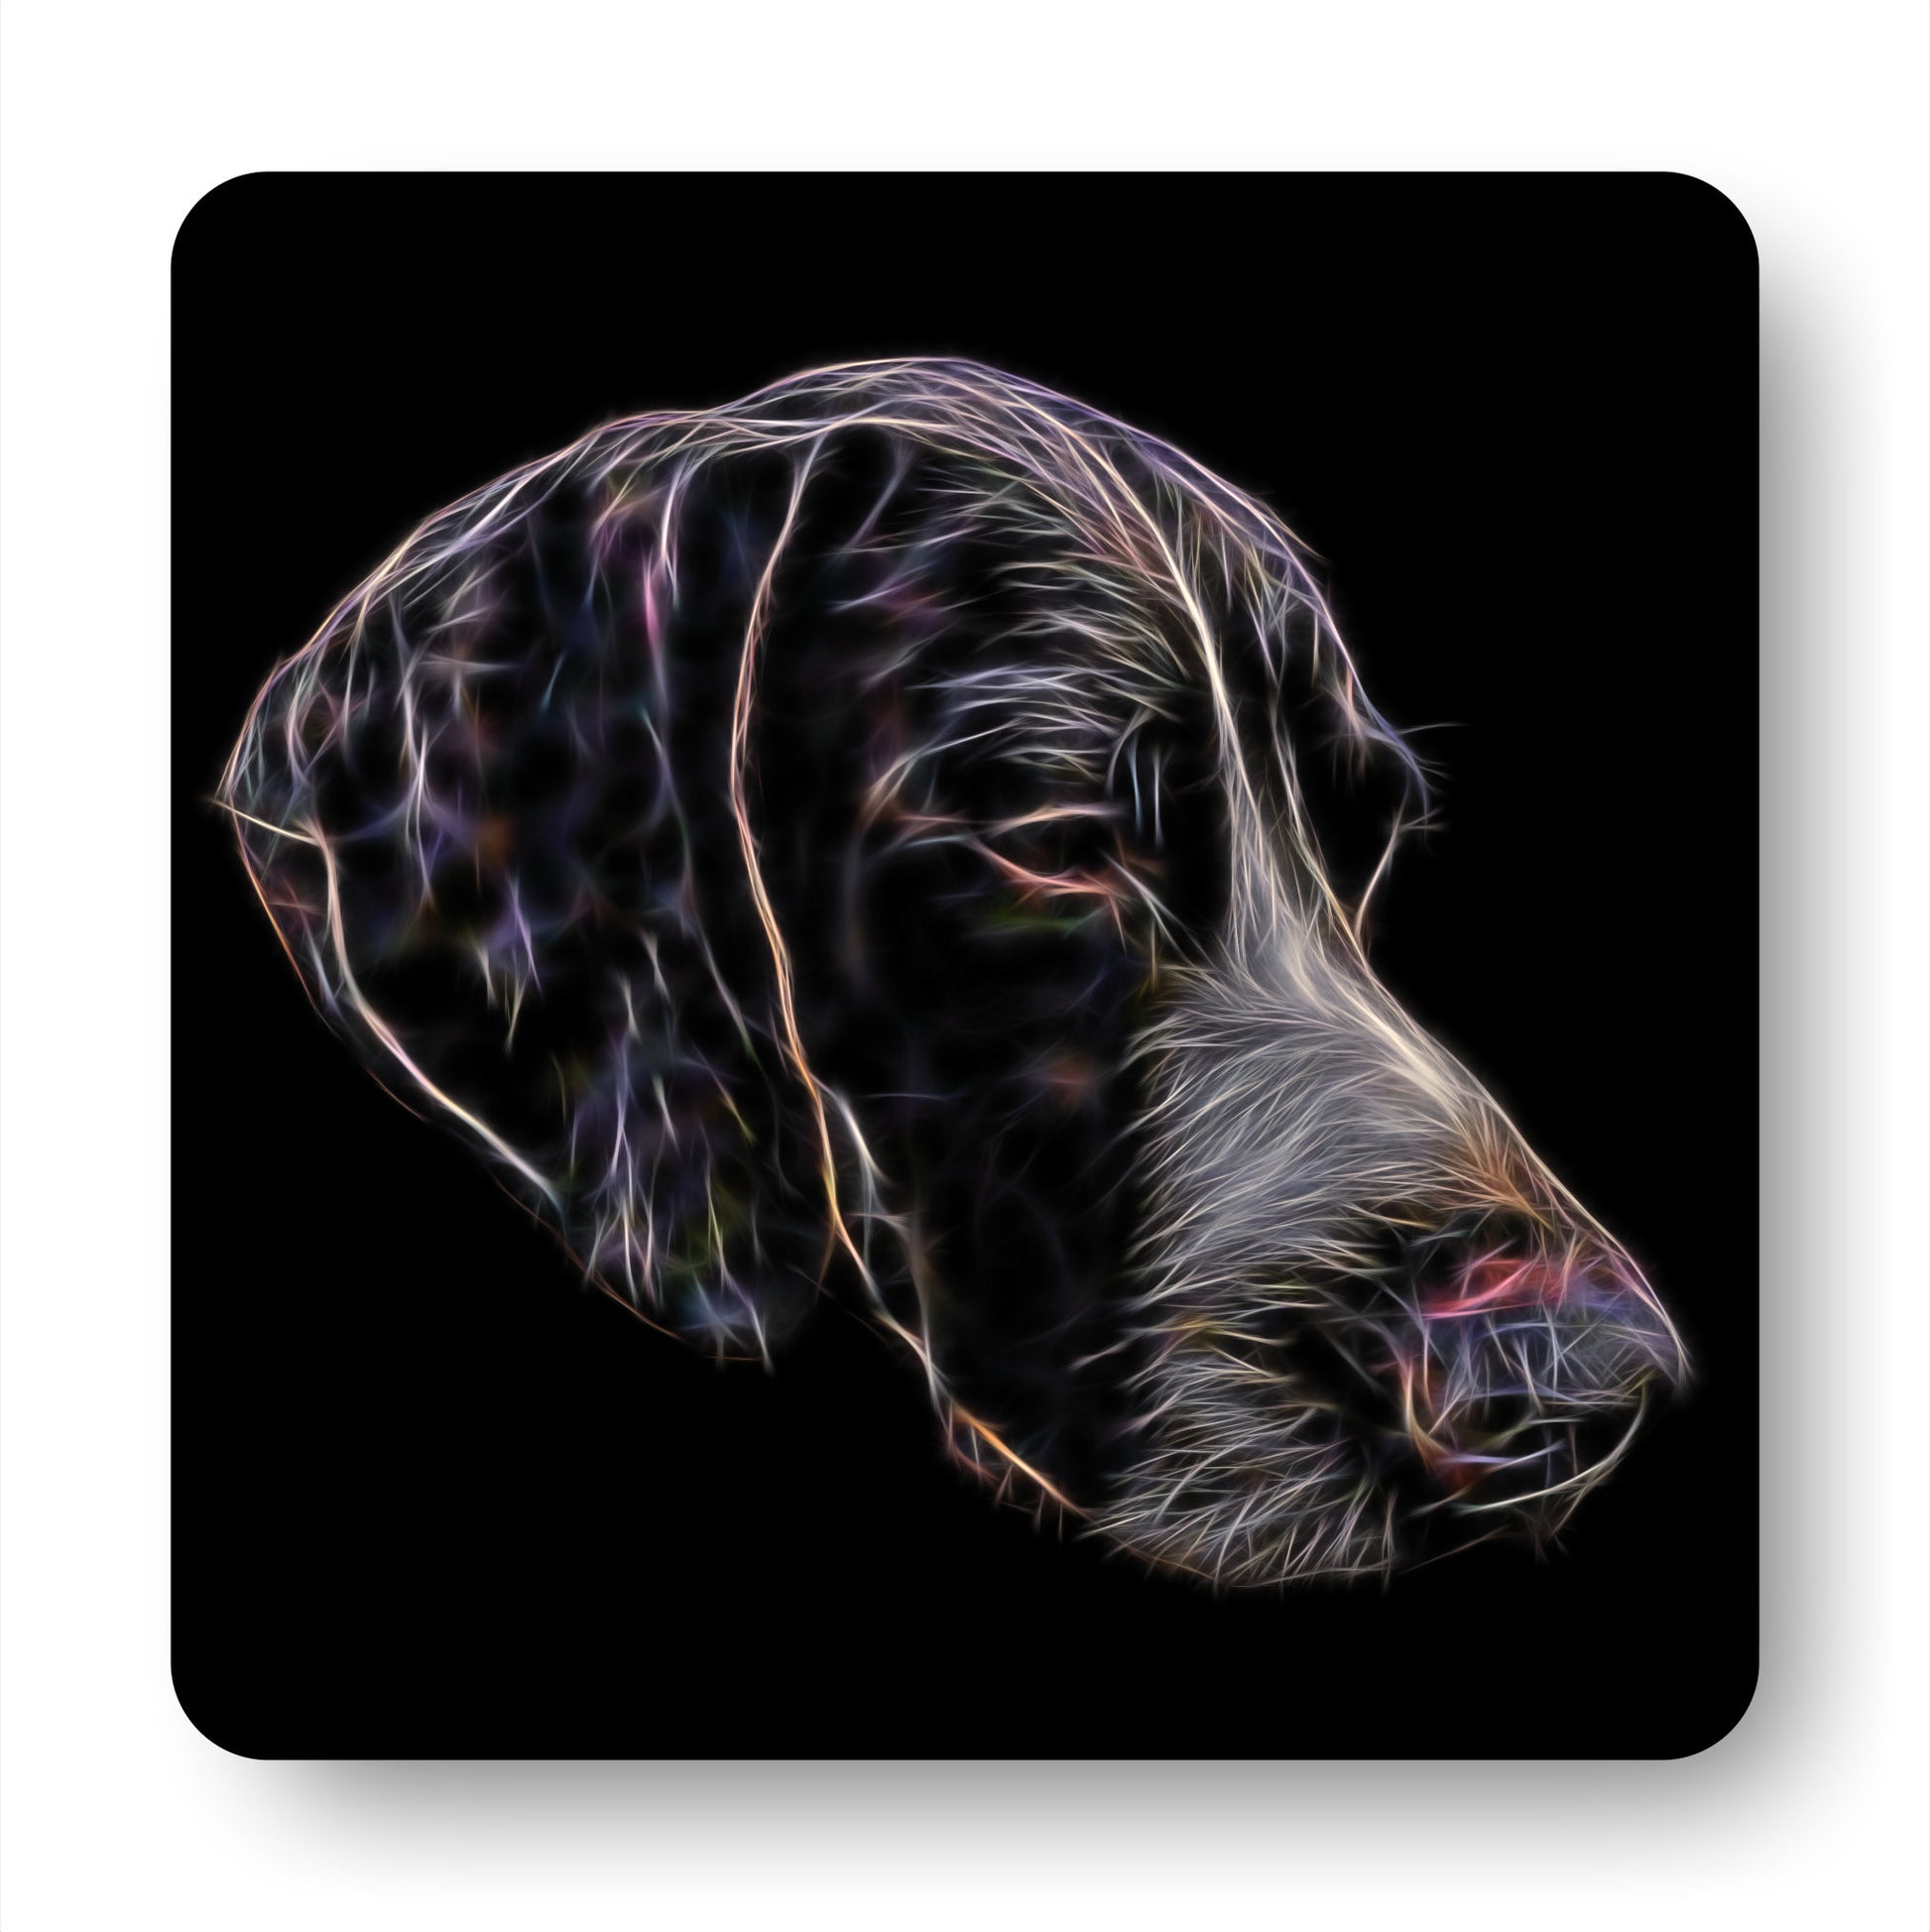 German Shorthaired Pointer Coasters, Set of 4, with Stunning Fractal Art Design